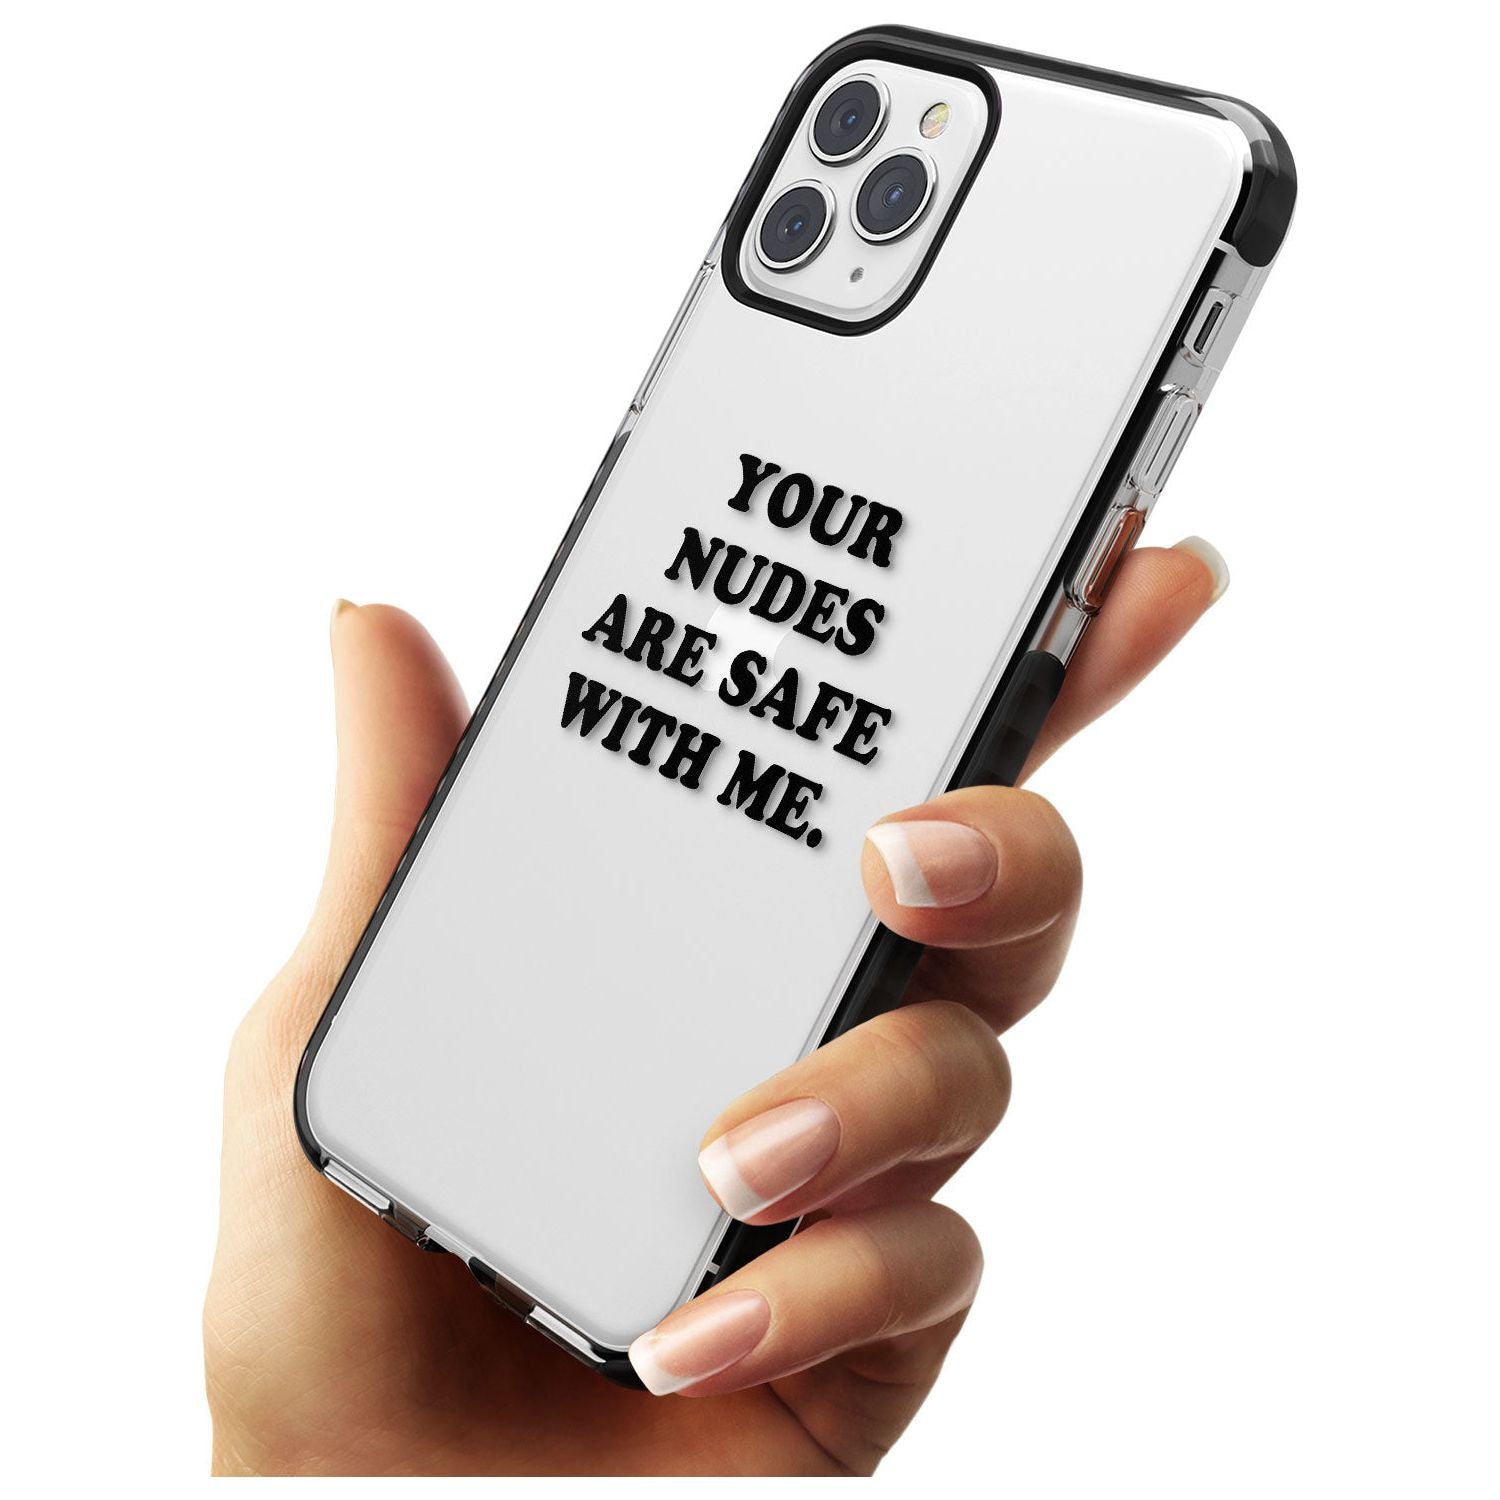 Your nudes are safe with me... BLACK Black Impact Phone Case for iPhone 11 Pro Max